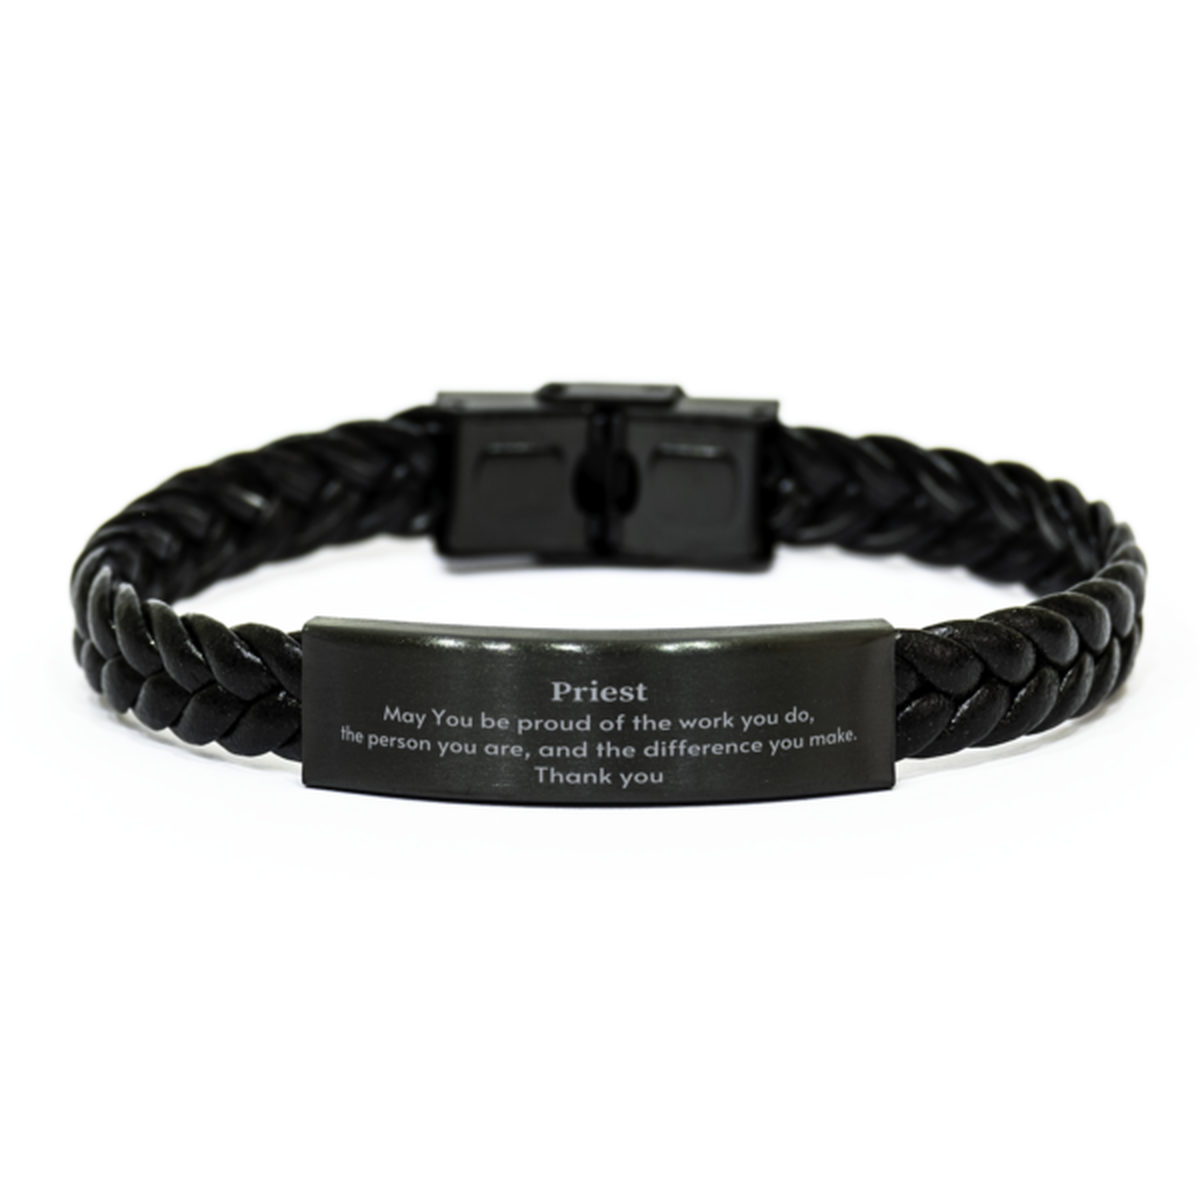 Heartwarming Braided Leather Bracelet Retirement Coworkers Gifts for Priest, Priest May You be proud of the work you do, the person you are Gifts for Boss Men Women Friends